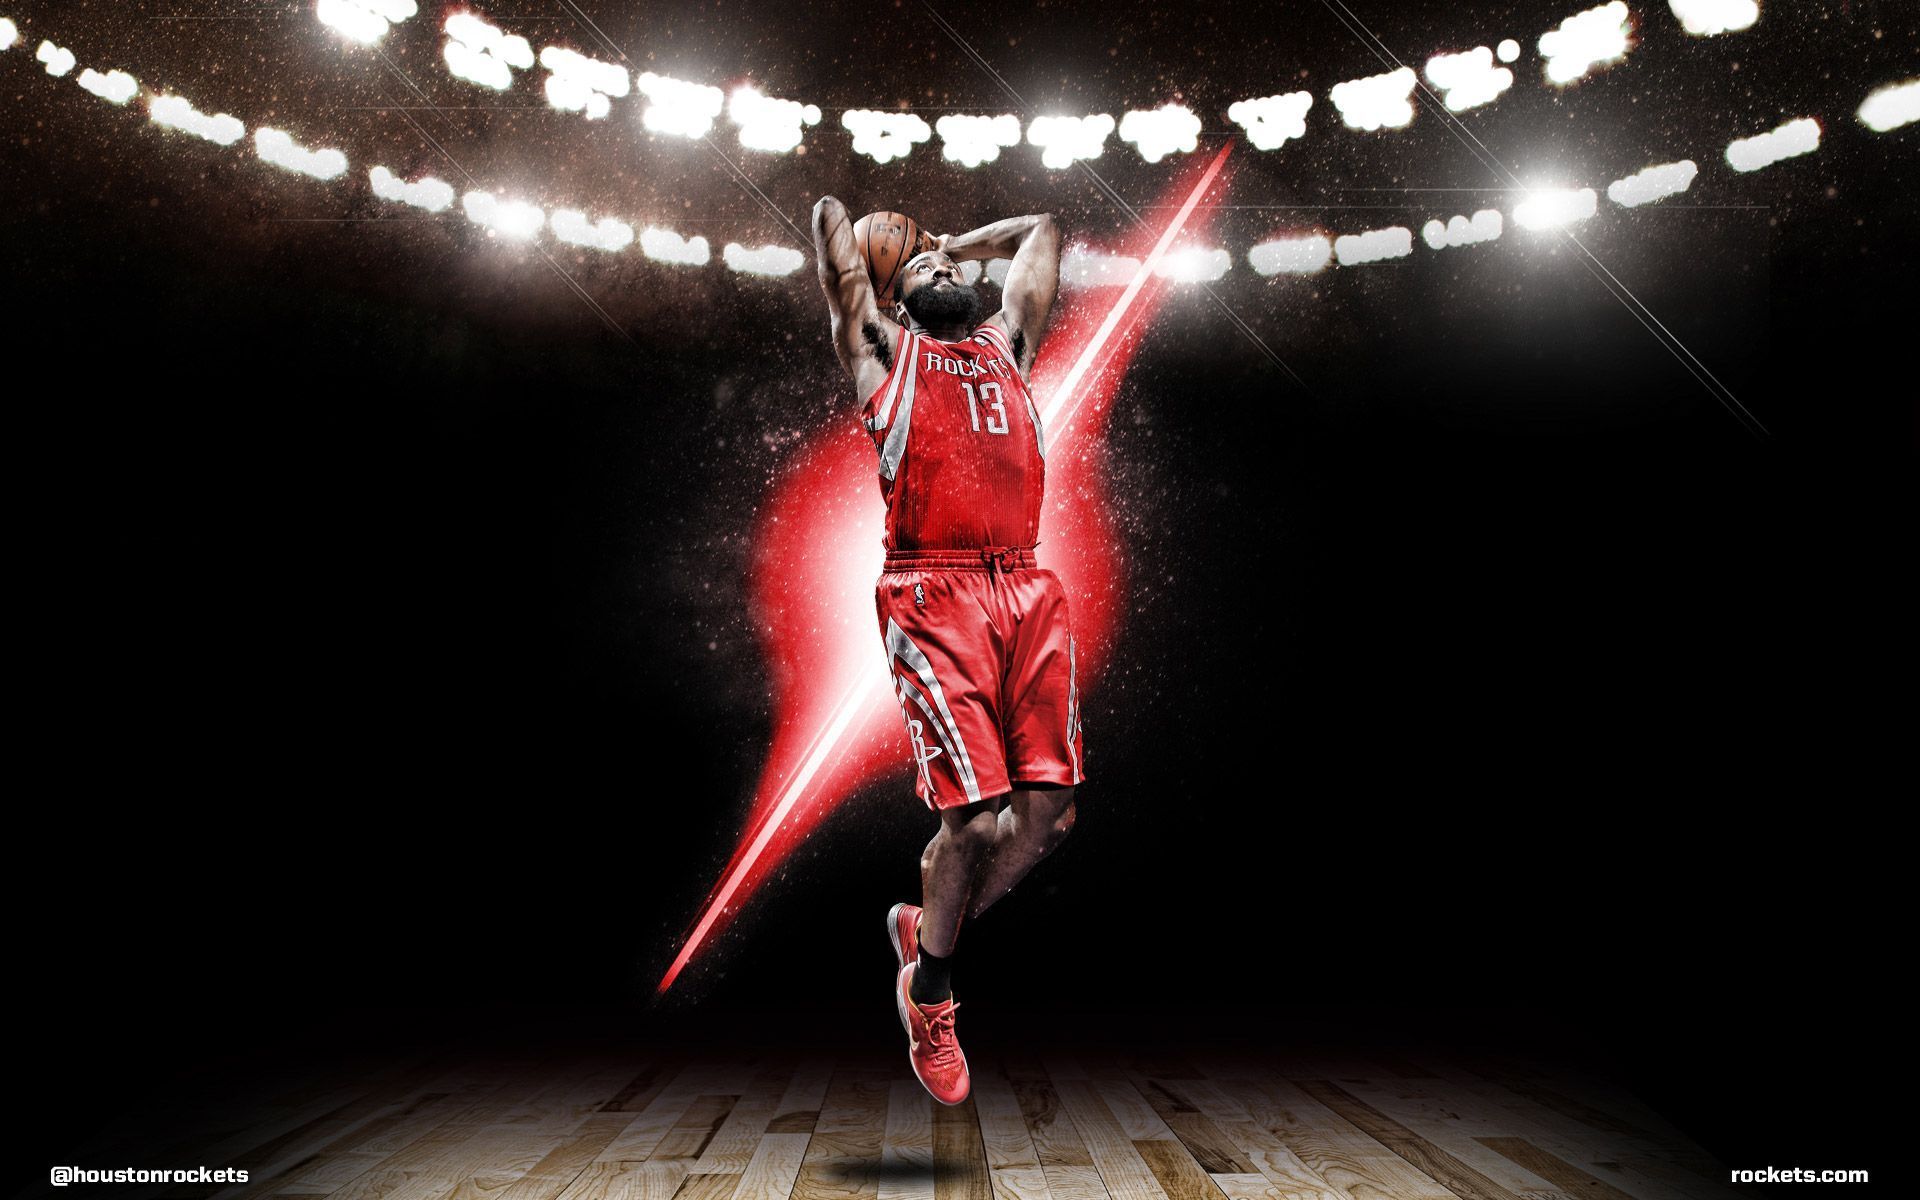 James Harden Wallpapers | Basketball Wallpapers at ...